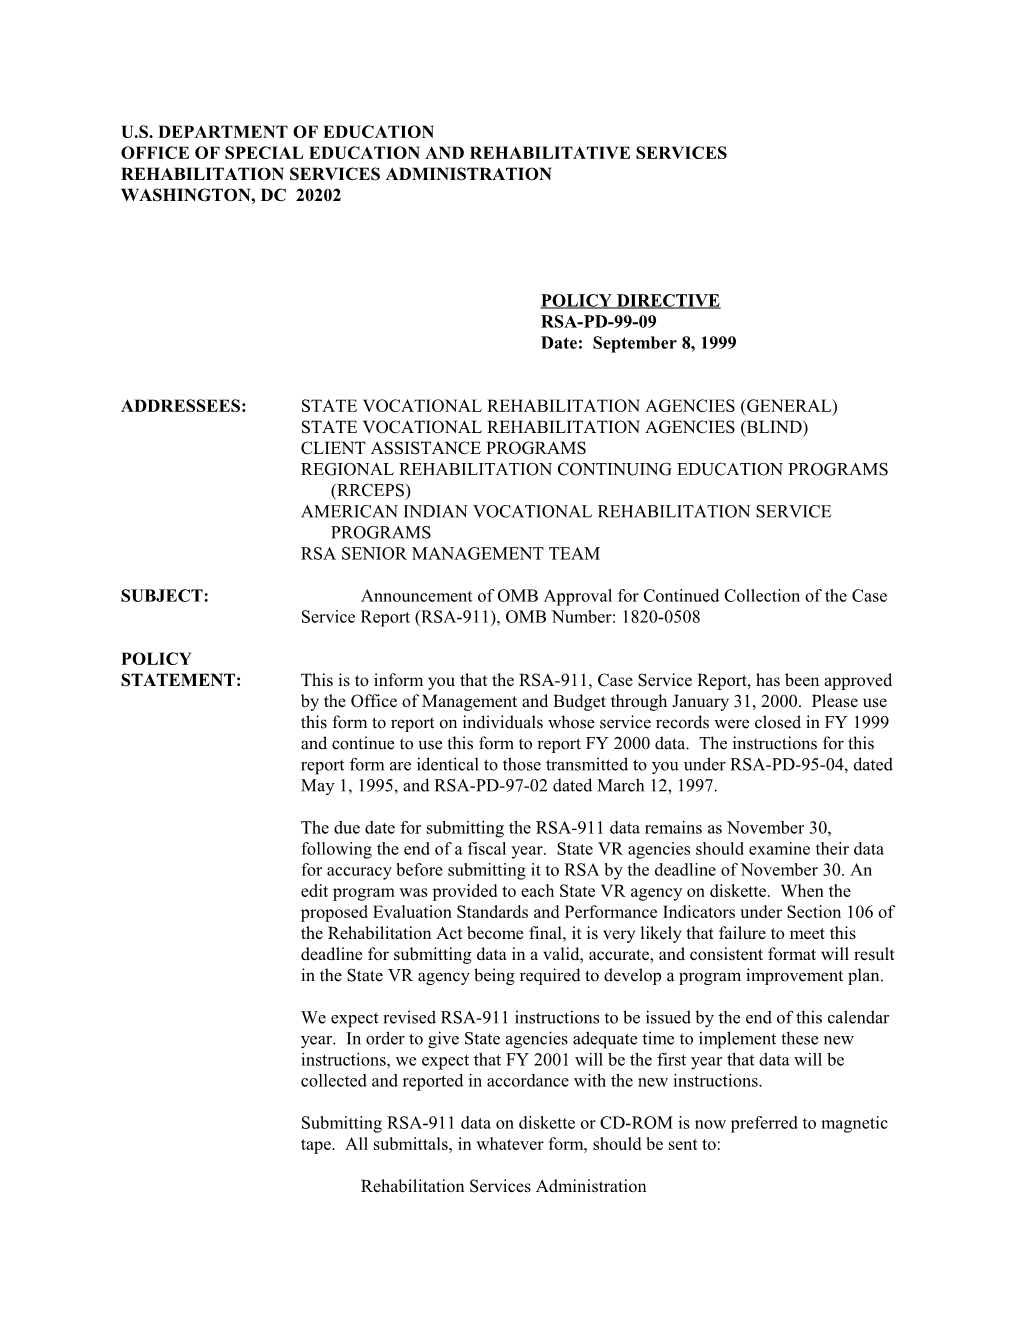 RSA-PD-99-09 Announcement of OMB Approval for Continued Collection of the Case Service